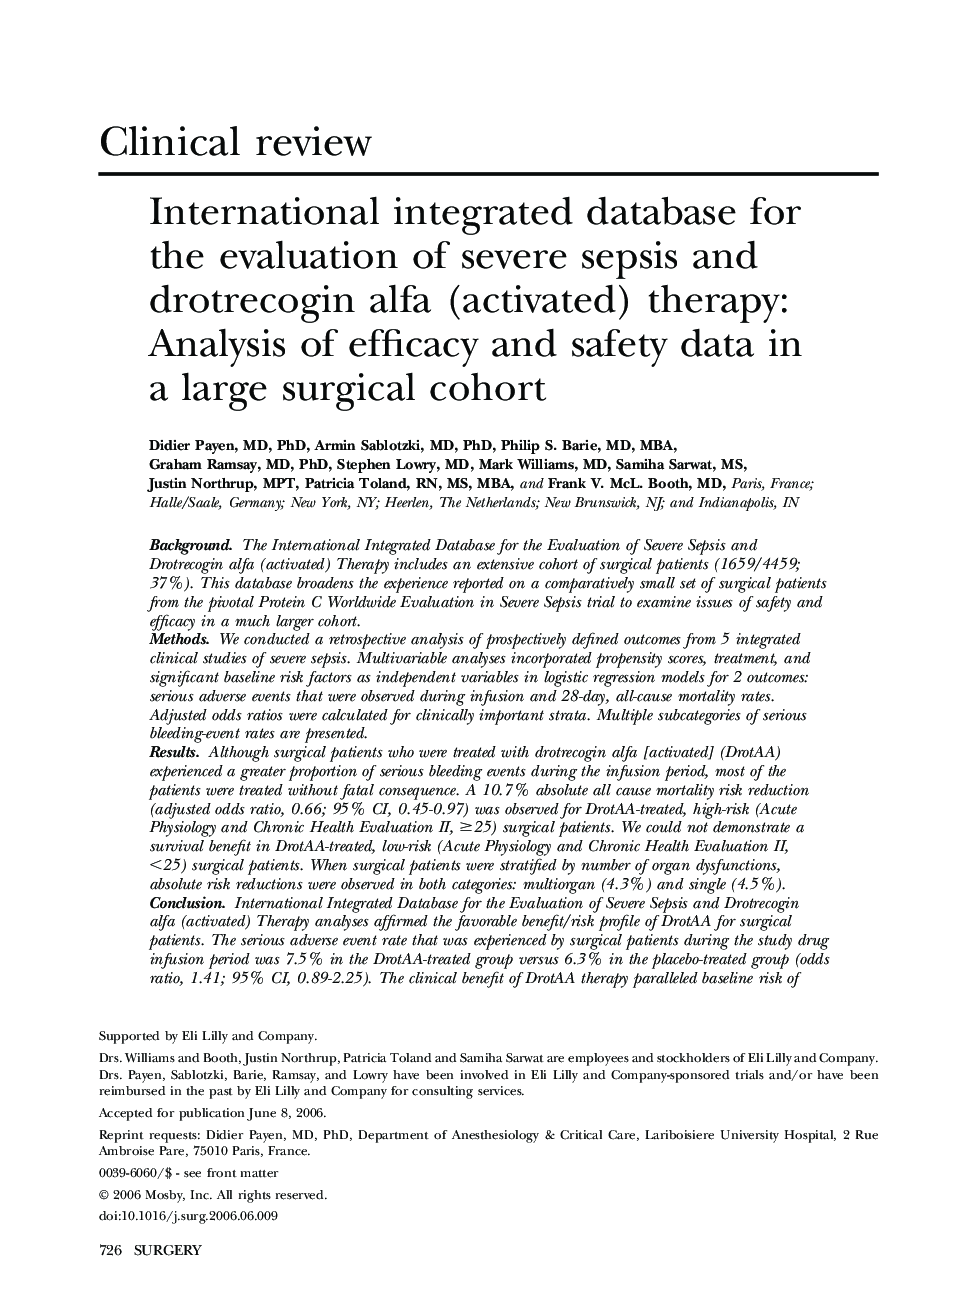 International integrated database for the evaluation of severe sepsis and drotrecogin alfa (activated) therapy: Analysis of efficacy and safety data in a large surgical cohort 